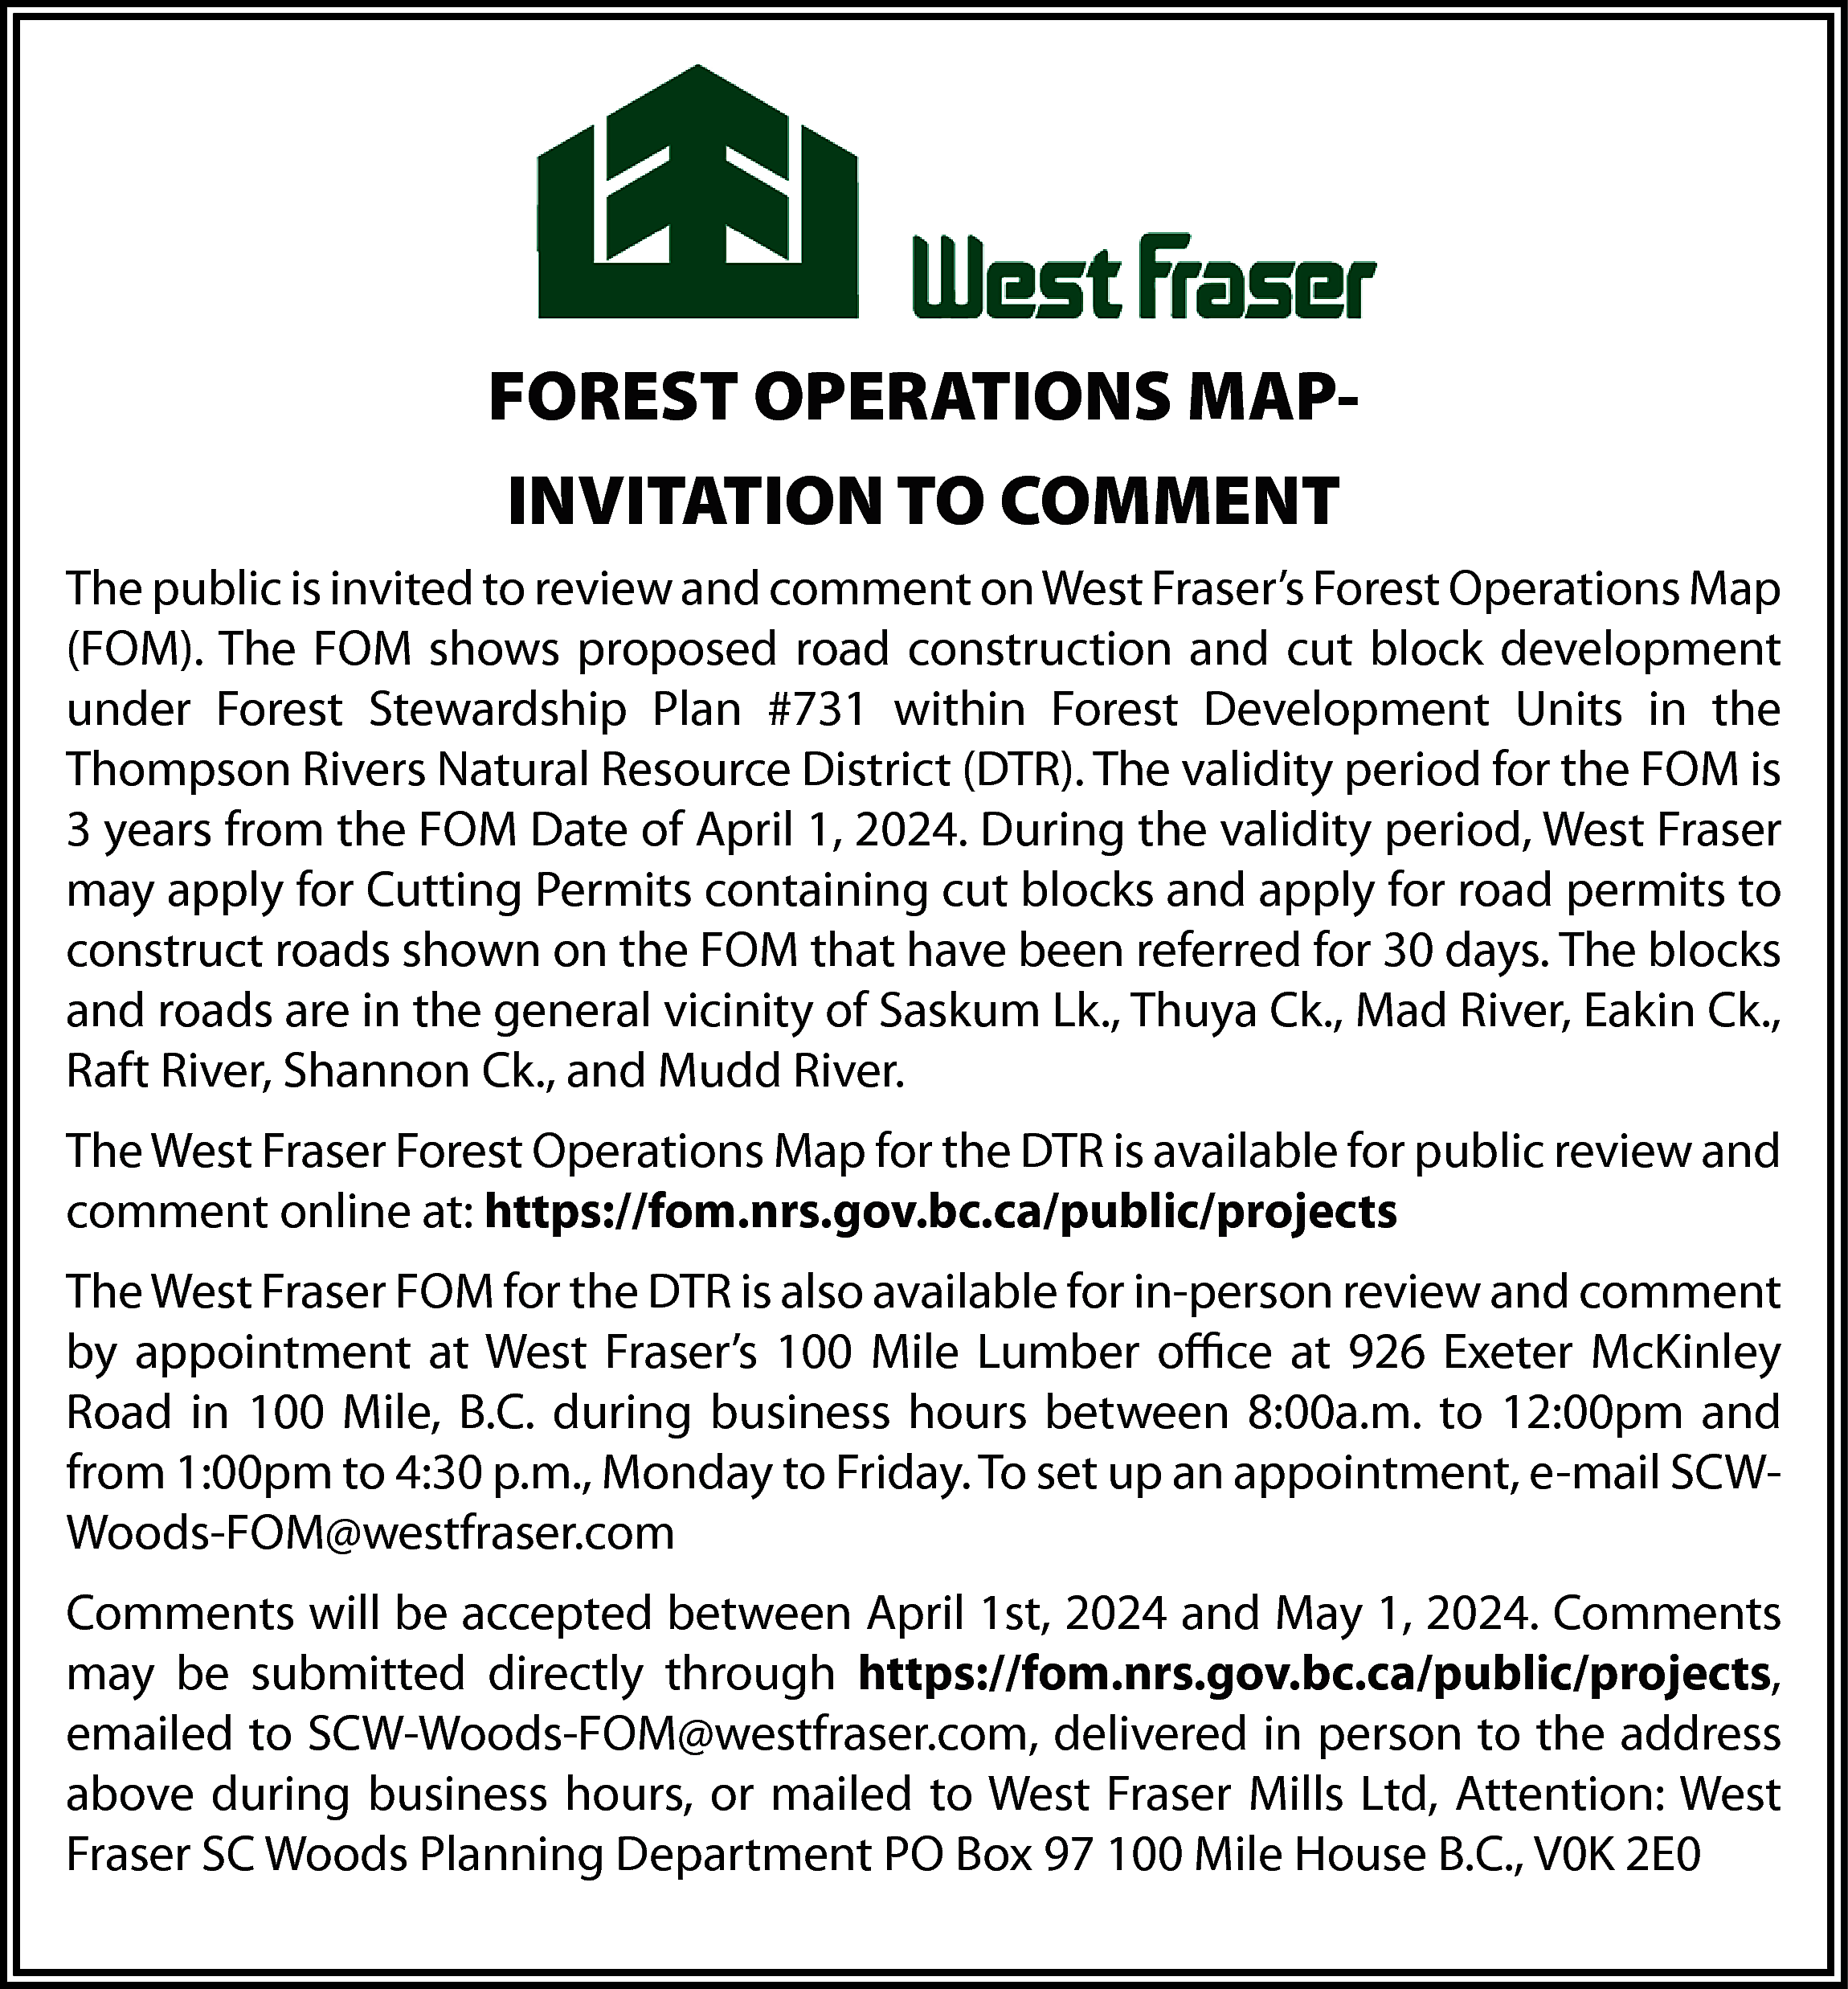 FOREST OPERATIONS MAPINVITATION TO COMMENT  FOREST OPERATIONS MAPINVITATION TO COMMENT  The public is invited to review and comment on West Fraser’s Forest Operations Map  (FOM). The FOM shows proposed road construction and cut block development  under Forest Stewardship Plan #731 within Forest Development Units in the  Thompson Rivers Natural Resource District (DTR). The validity period for the FOM is  3 years from the FOM Date of April 1, 2024. During the validity period, West Fraser  may apply for Cutting Permits containing cut blocks and apply for road permits to  construct roads shown on the FOM that have been referred for 30 days. The blocks  and roads are in the general vicinity of Saskum Lk., Thuya Ck., Mad River, Eakin Ck.,  Raft River, Shannon Ck., and Mudd River.  The West Fraser Forest Operations Map for the DTR is available for public review and  comment online at: https://fom.nrs.gov.bc.ca/public/projects  The West Fraser FOM for the DTR is also available for in-person review and comment  by appointment at West Fraser’s 100 Mile Lumber office at 926 Exeter McKinley  Road in 100 Mile, B.C. during business hours between 8:00a.m. to 12:00pm and  from 1:00pm to 4:30 p.m., Monday to Friday. To set up an appointment, e-mail SCWWoods-FOM@westfraser.com  Comments will be accepted between April 1st, 2024 and May 1, 2024. Comments  may be submitted directly through https://fom.nrs.gov.bc.ca/public/projects,  emailed to SCW-Woods-FOM@westfraser.com, delivered in person to the address  above during business hours, or mailed to West Fraser Mills Ltd, Attention: West  Fraser SC Woods Planning Department PO Box 97 100 Mile House B.C., V0K 2E0    